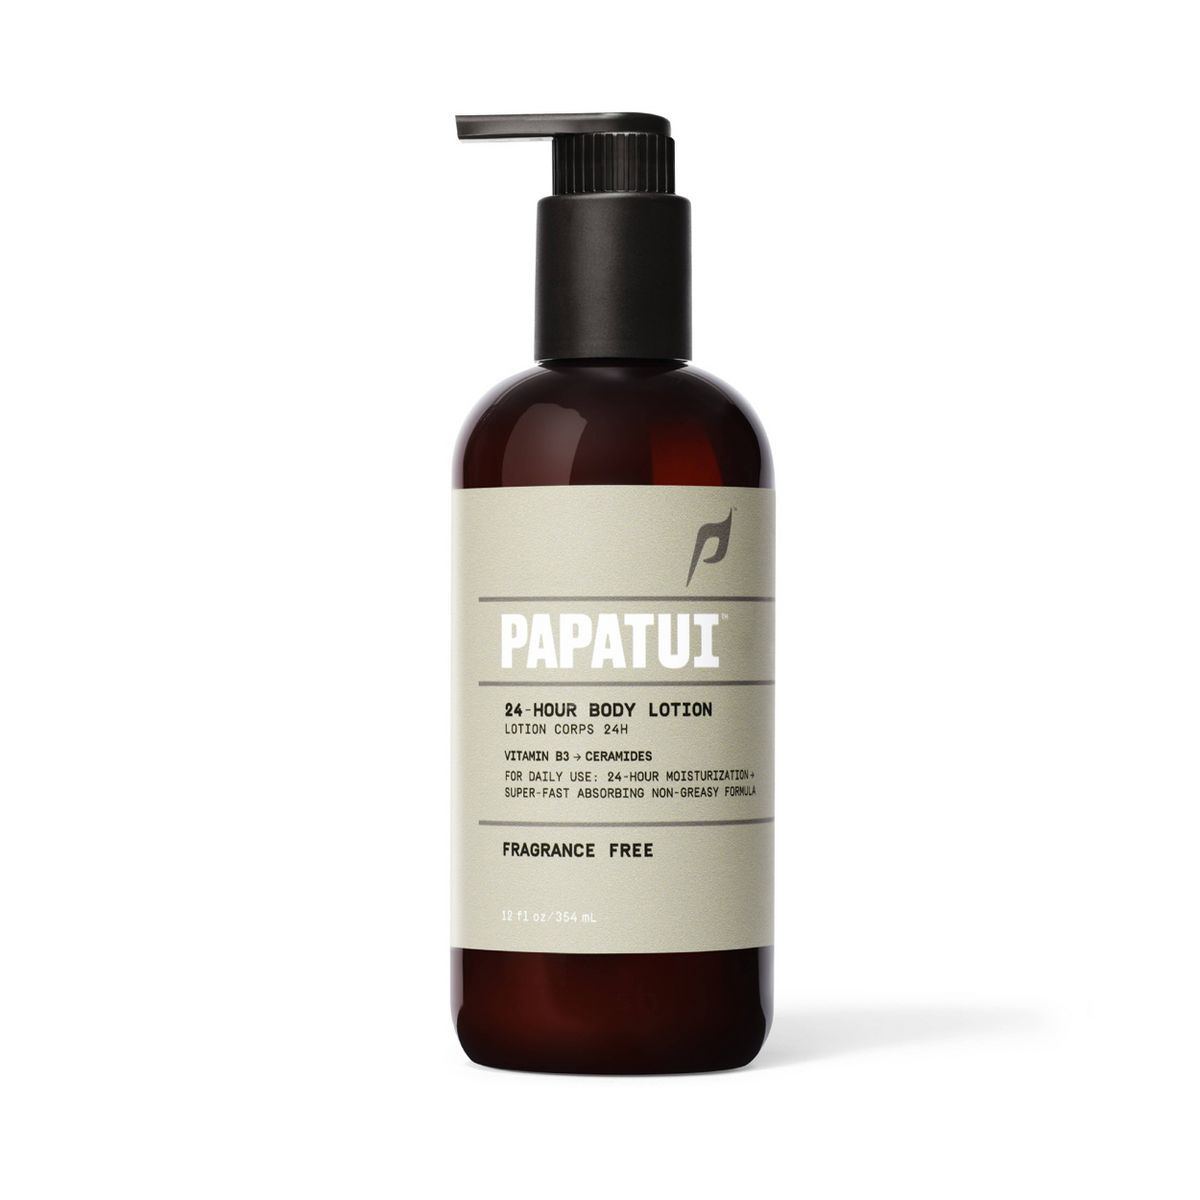 Papatui 24-Hour Body Lotion Unscented - 11.5 fl oz - From Dwayne “The Rock” Johnson | Target